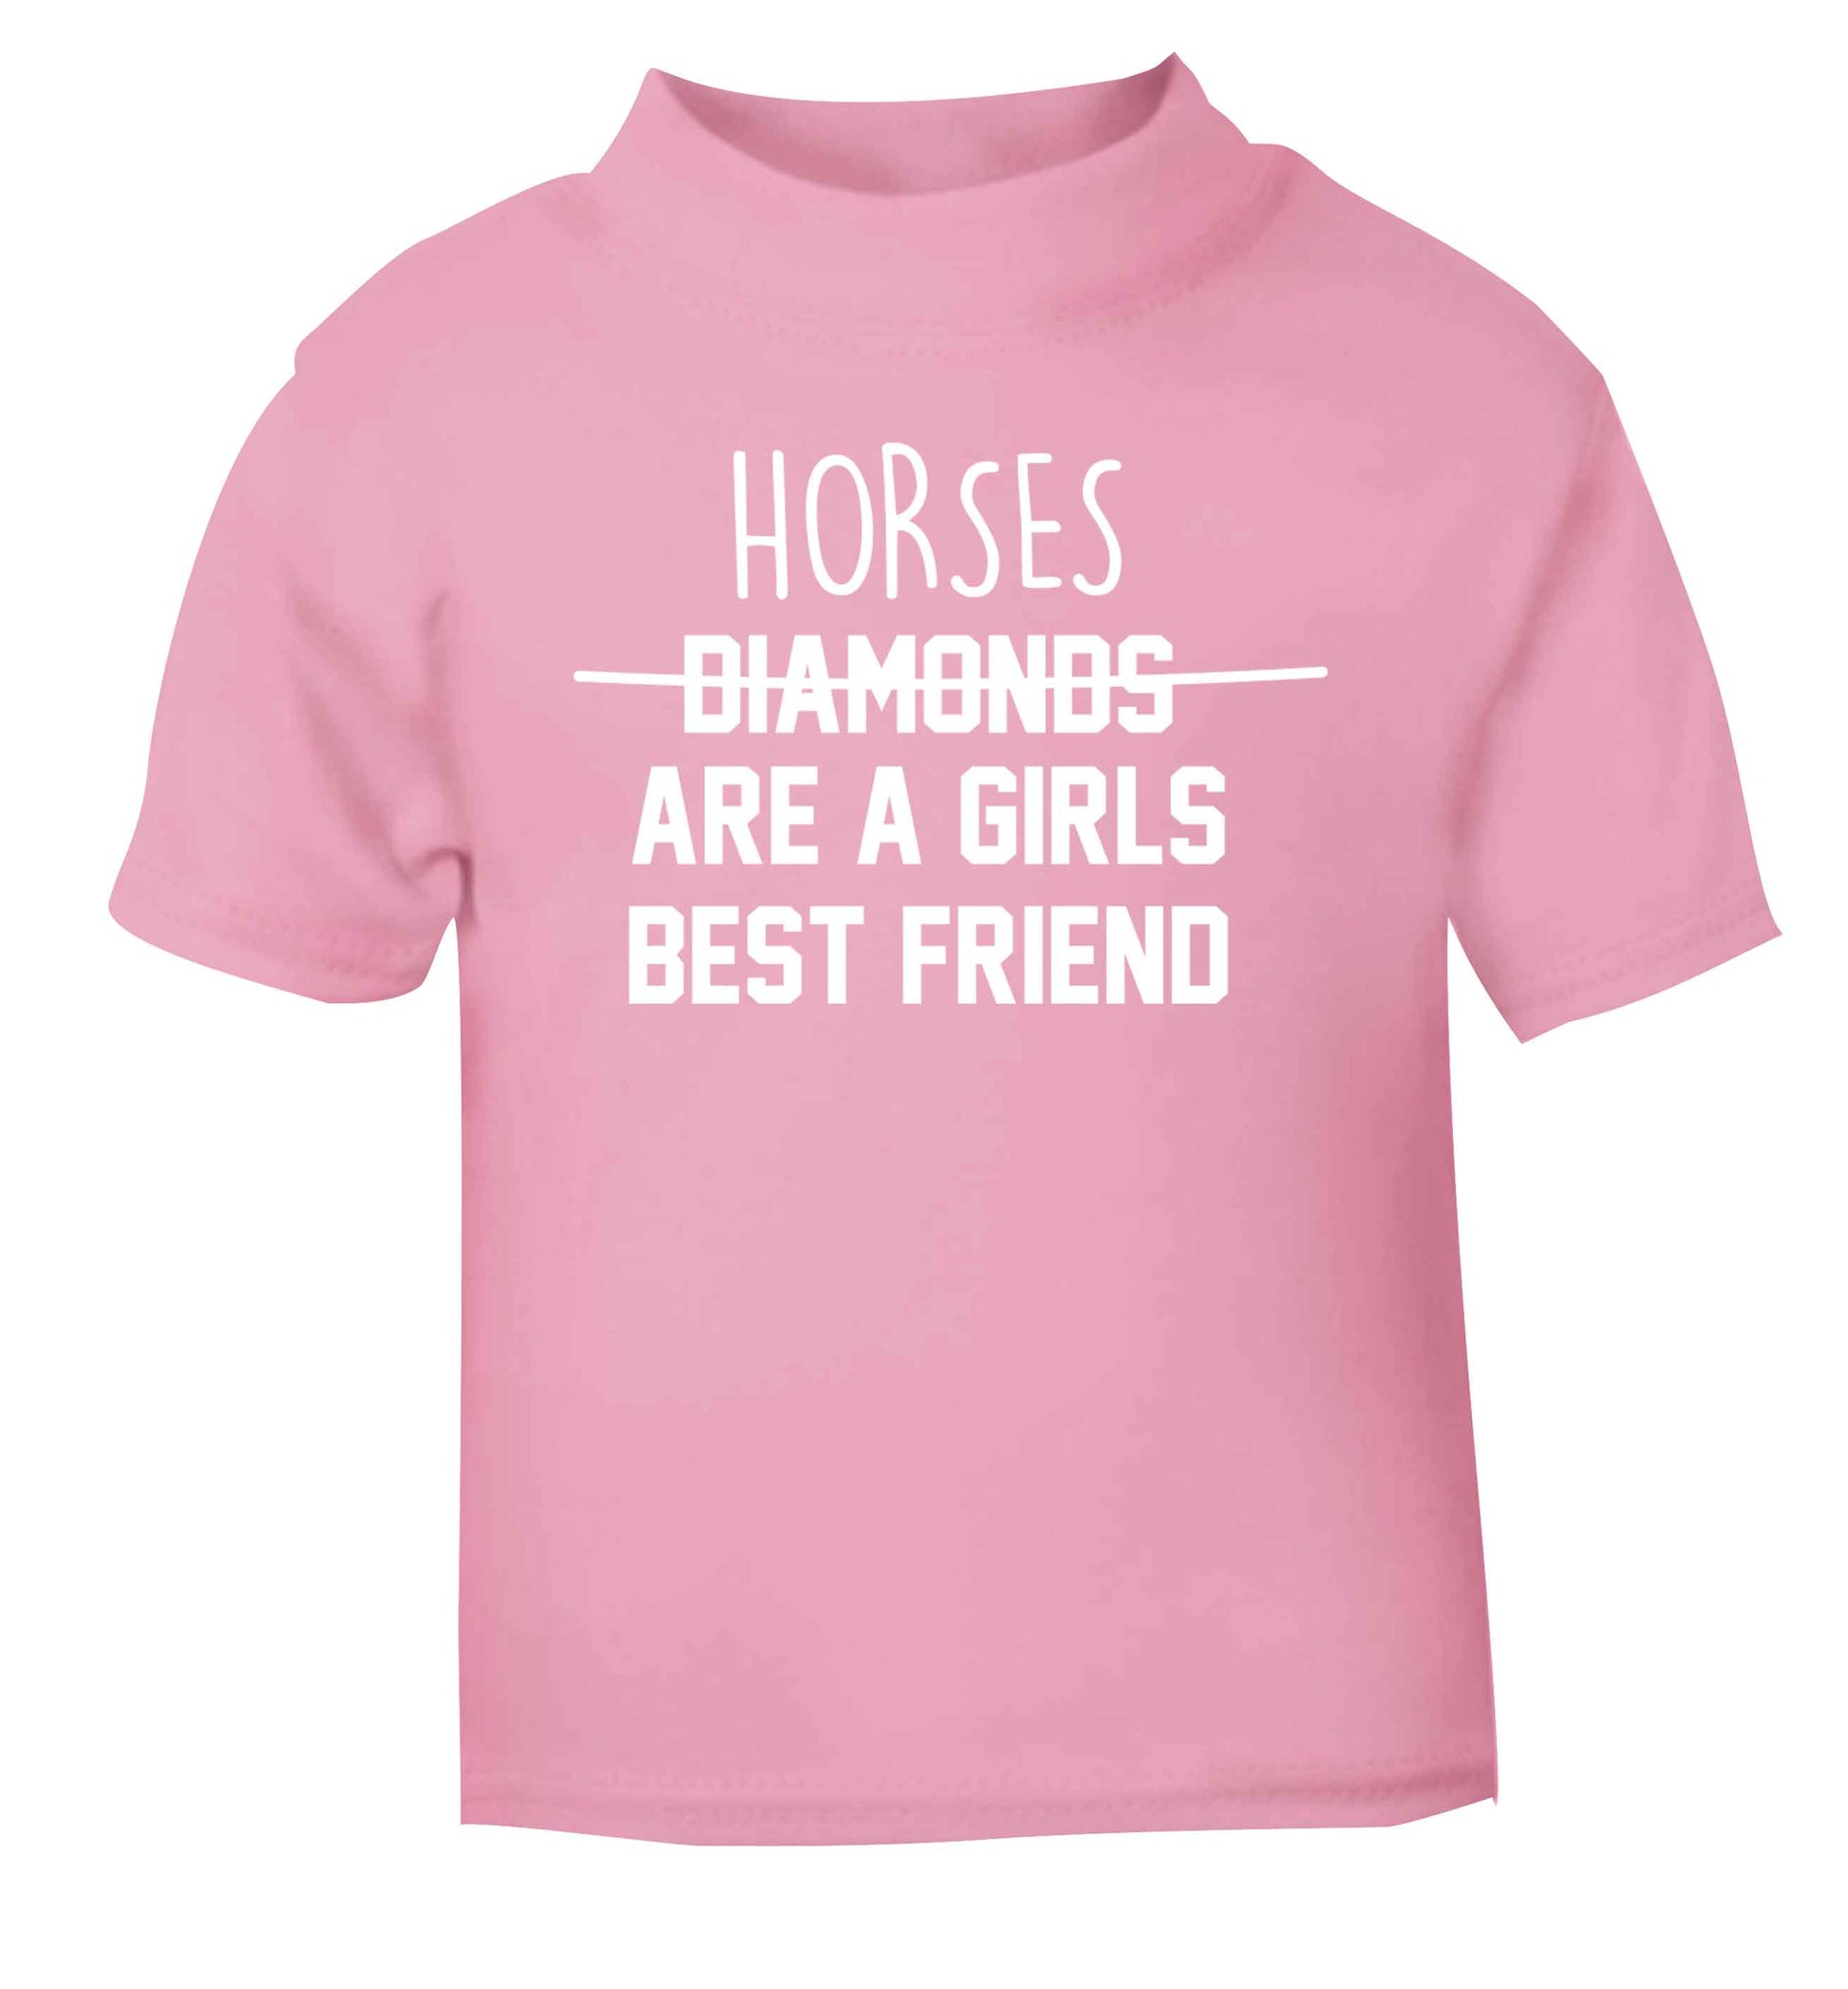 Horses are a girls best friend light pink baby toddler Tshirt 2 Years